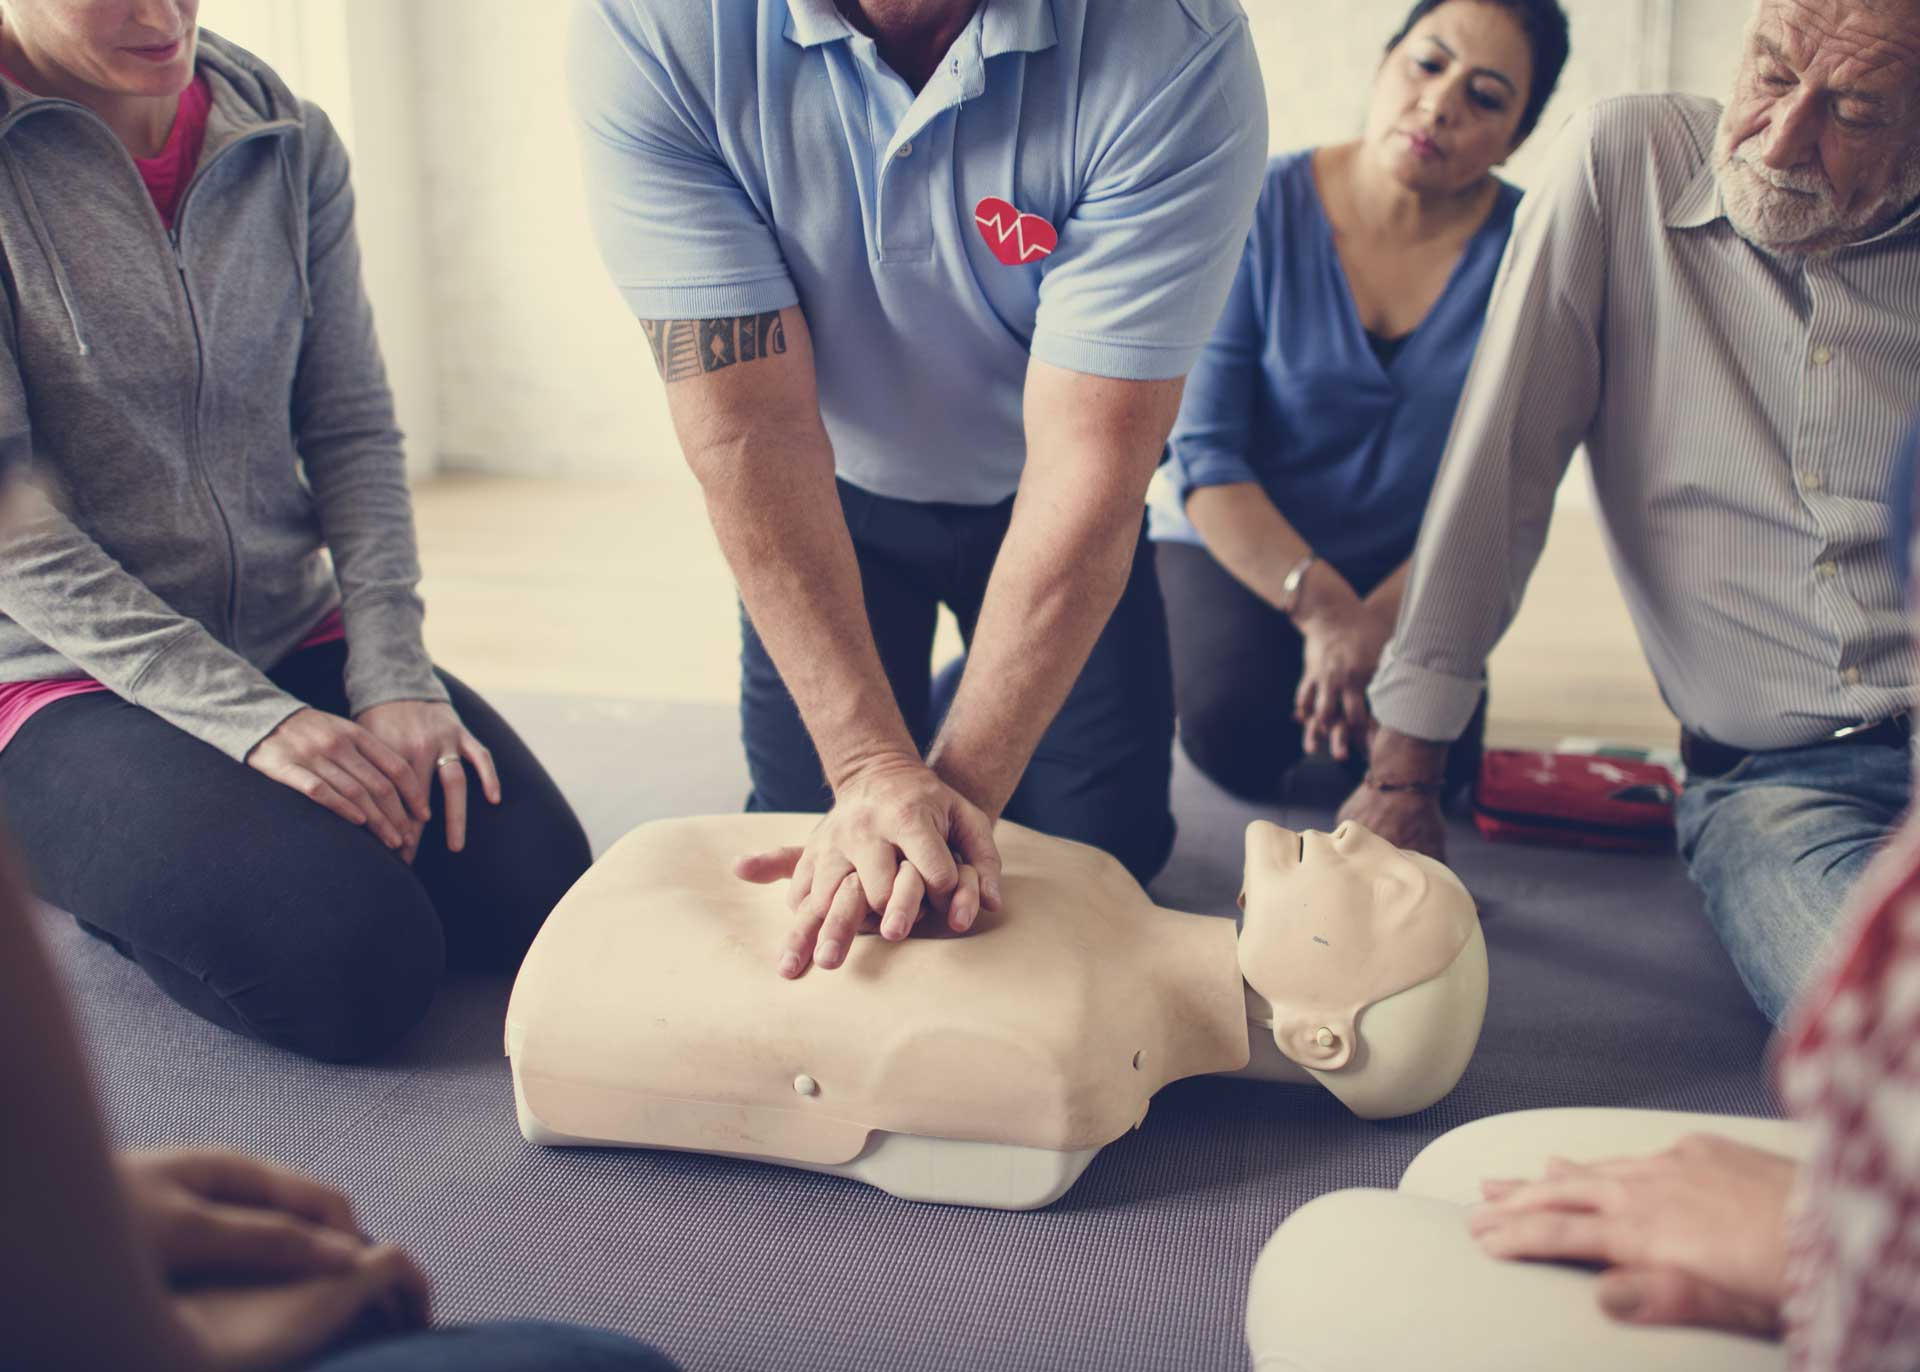 CPR Proficiency: A Critical Skill for Health and Safety